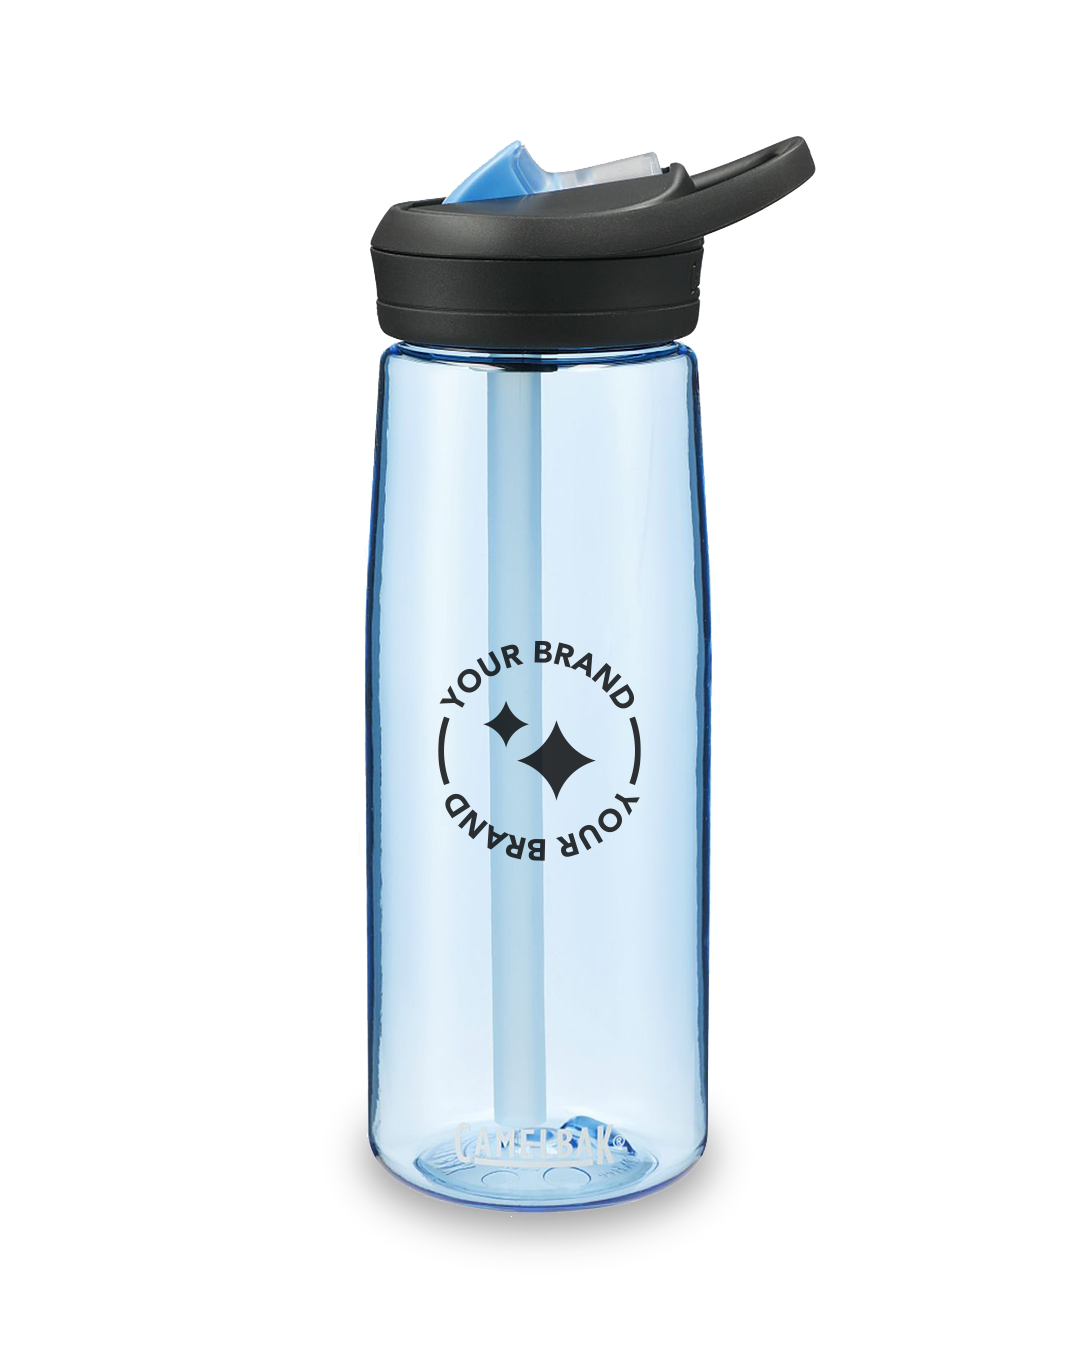 Ello and Eastman launch sustainable water bottle in US